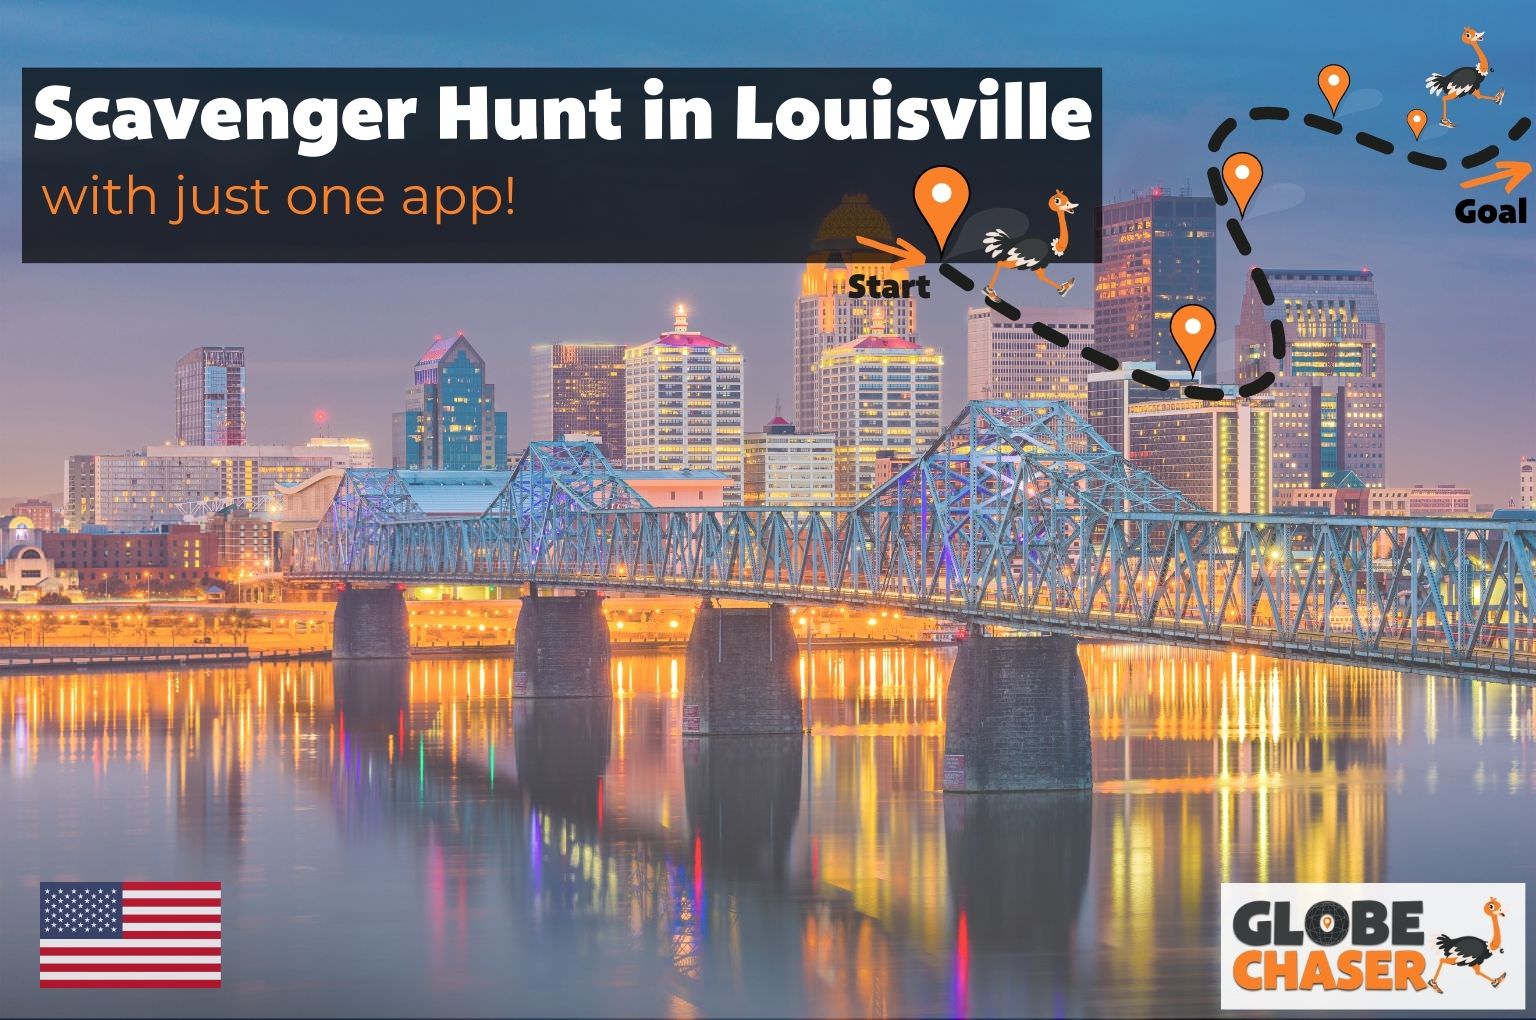 Scavenger Hunt in Louisville, USA - Family Activities with the Globe Chaser App for Outdoor Fun